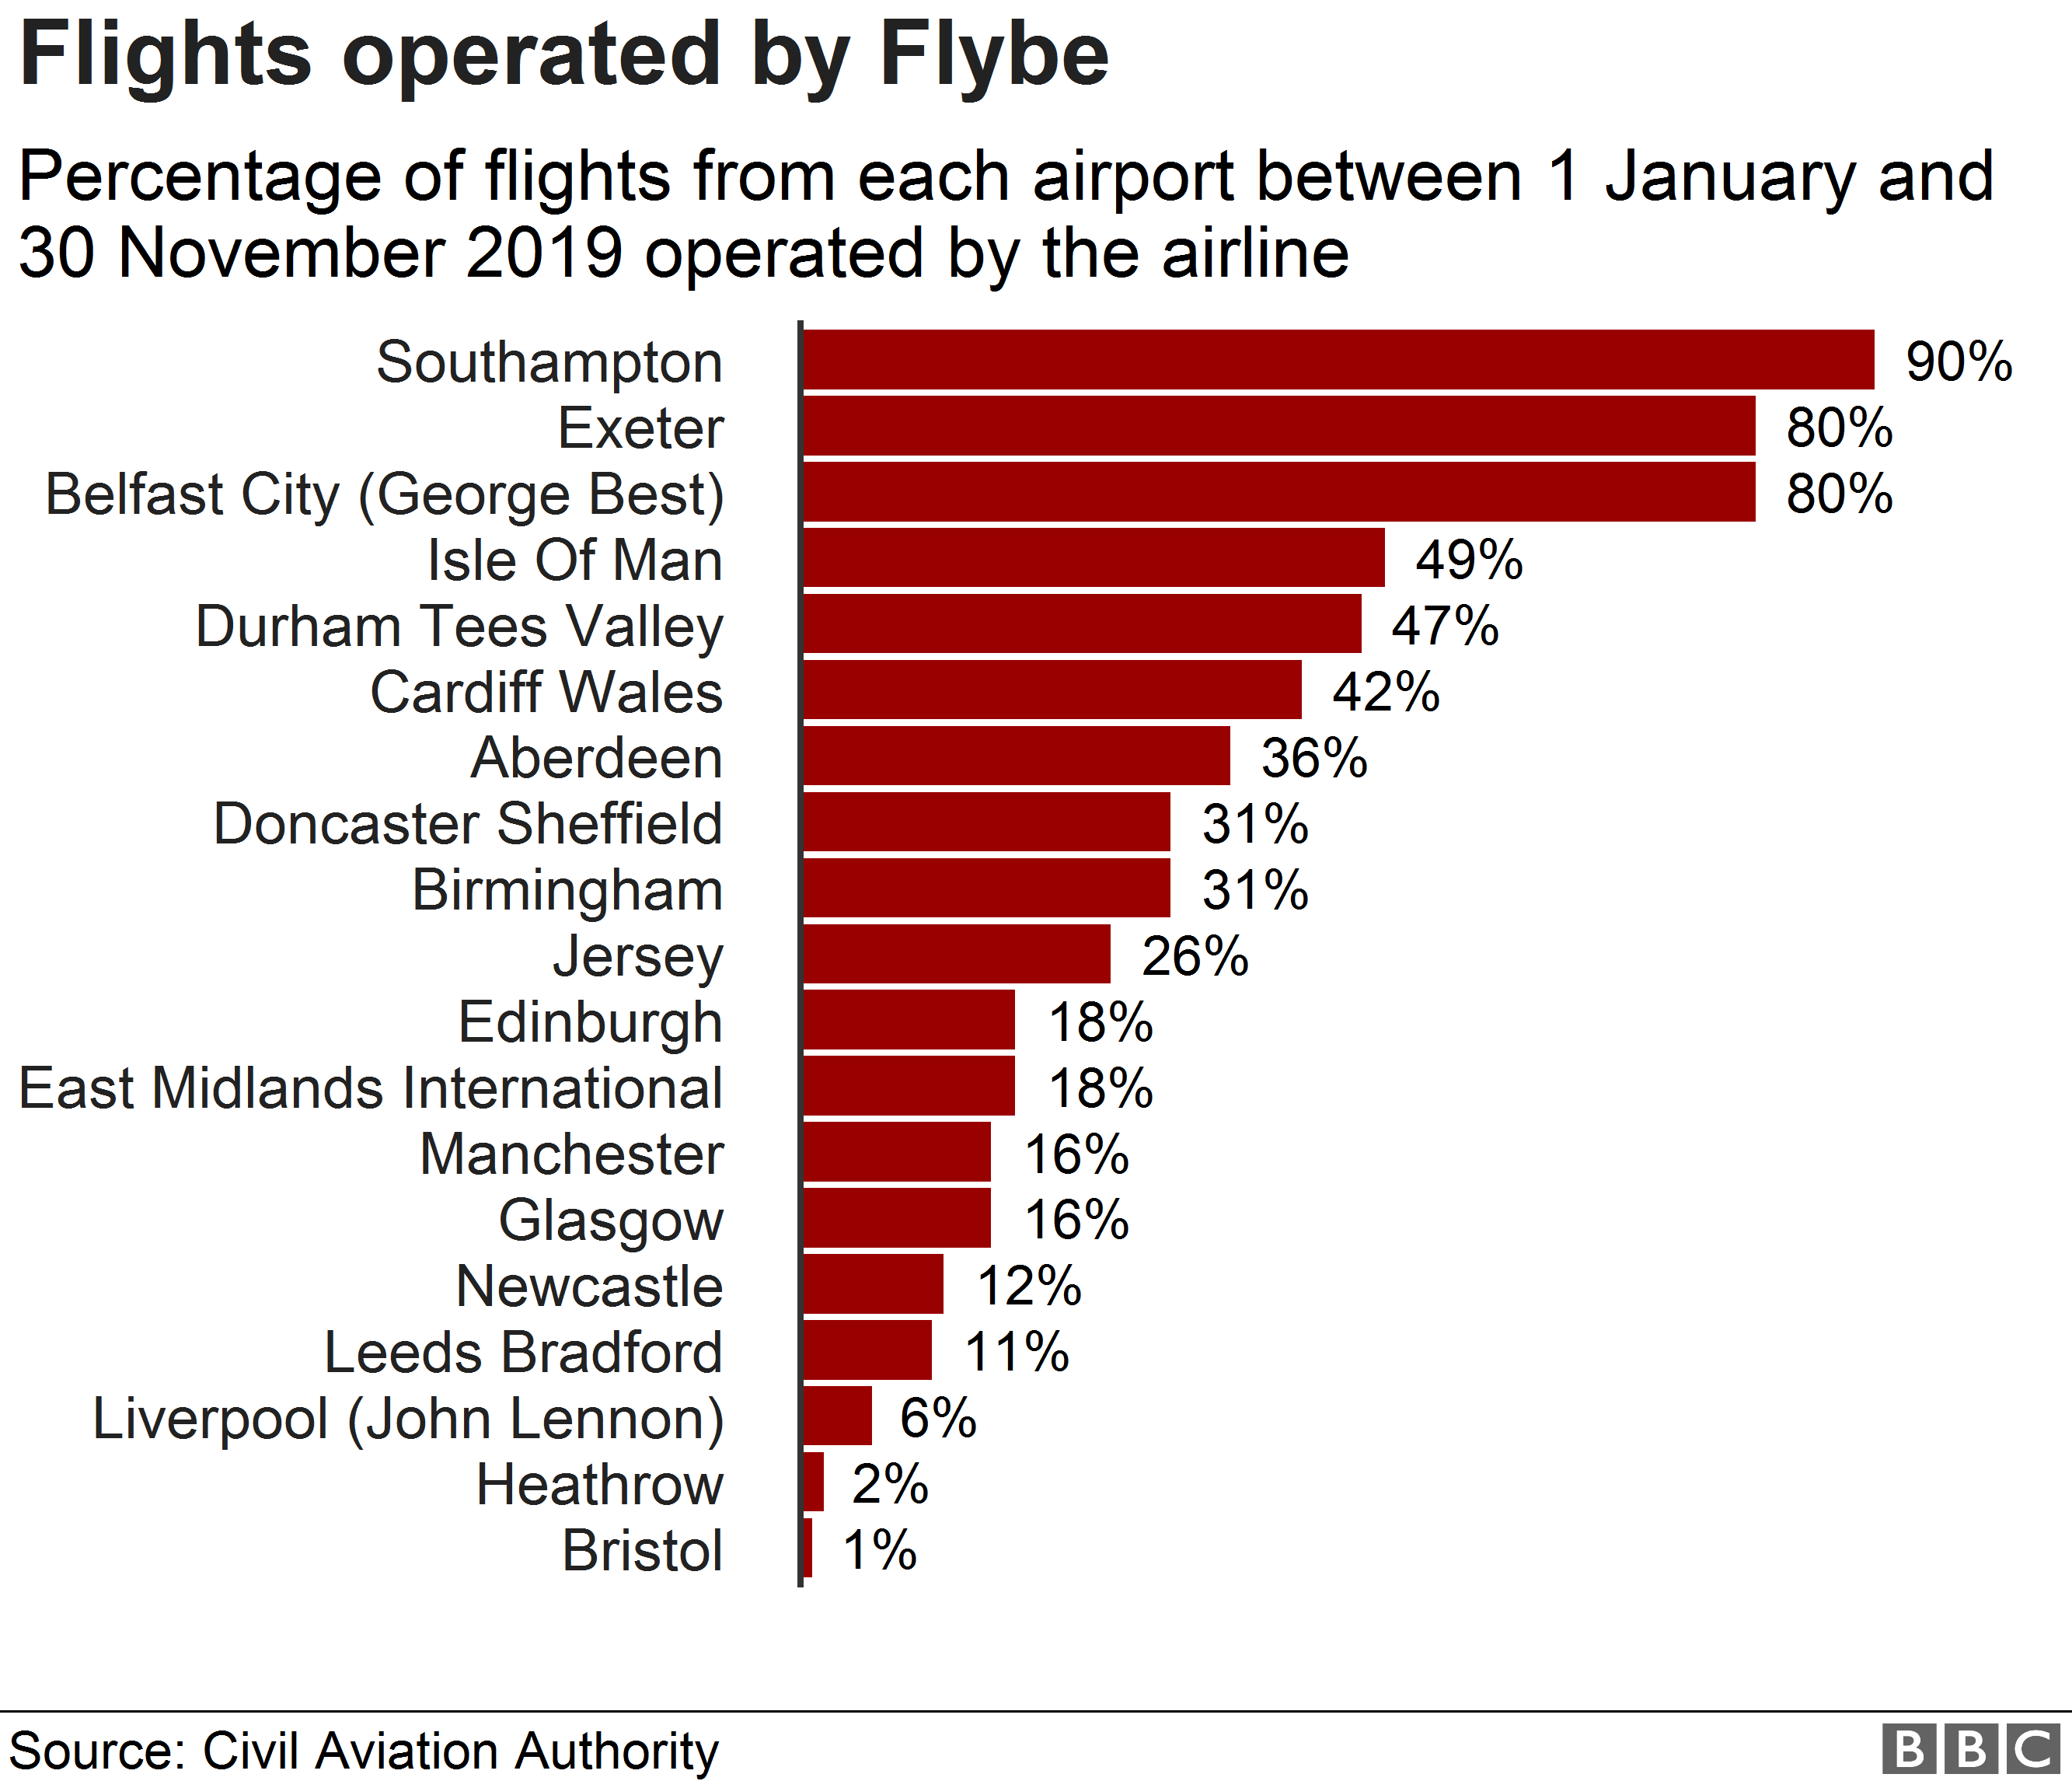 Chart showing flights operated by Flybe